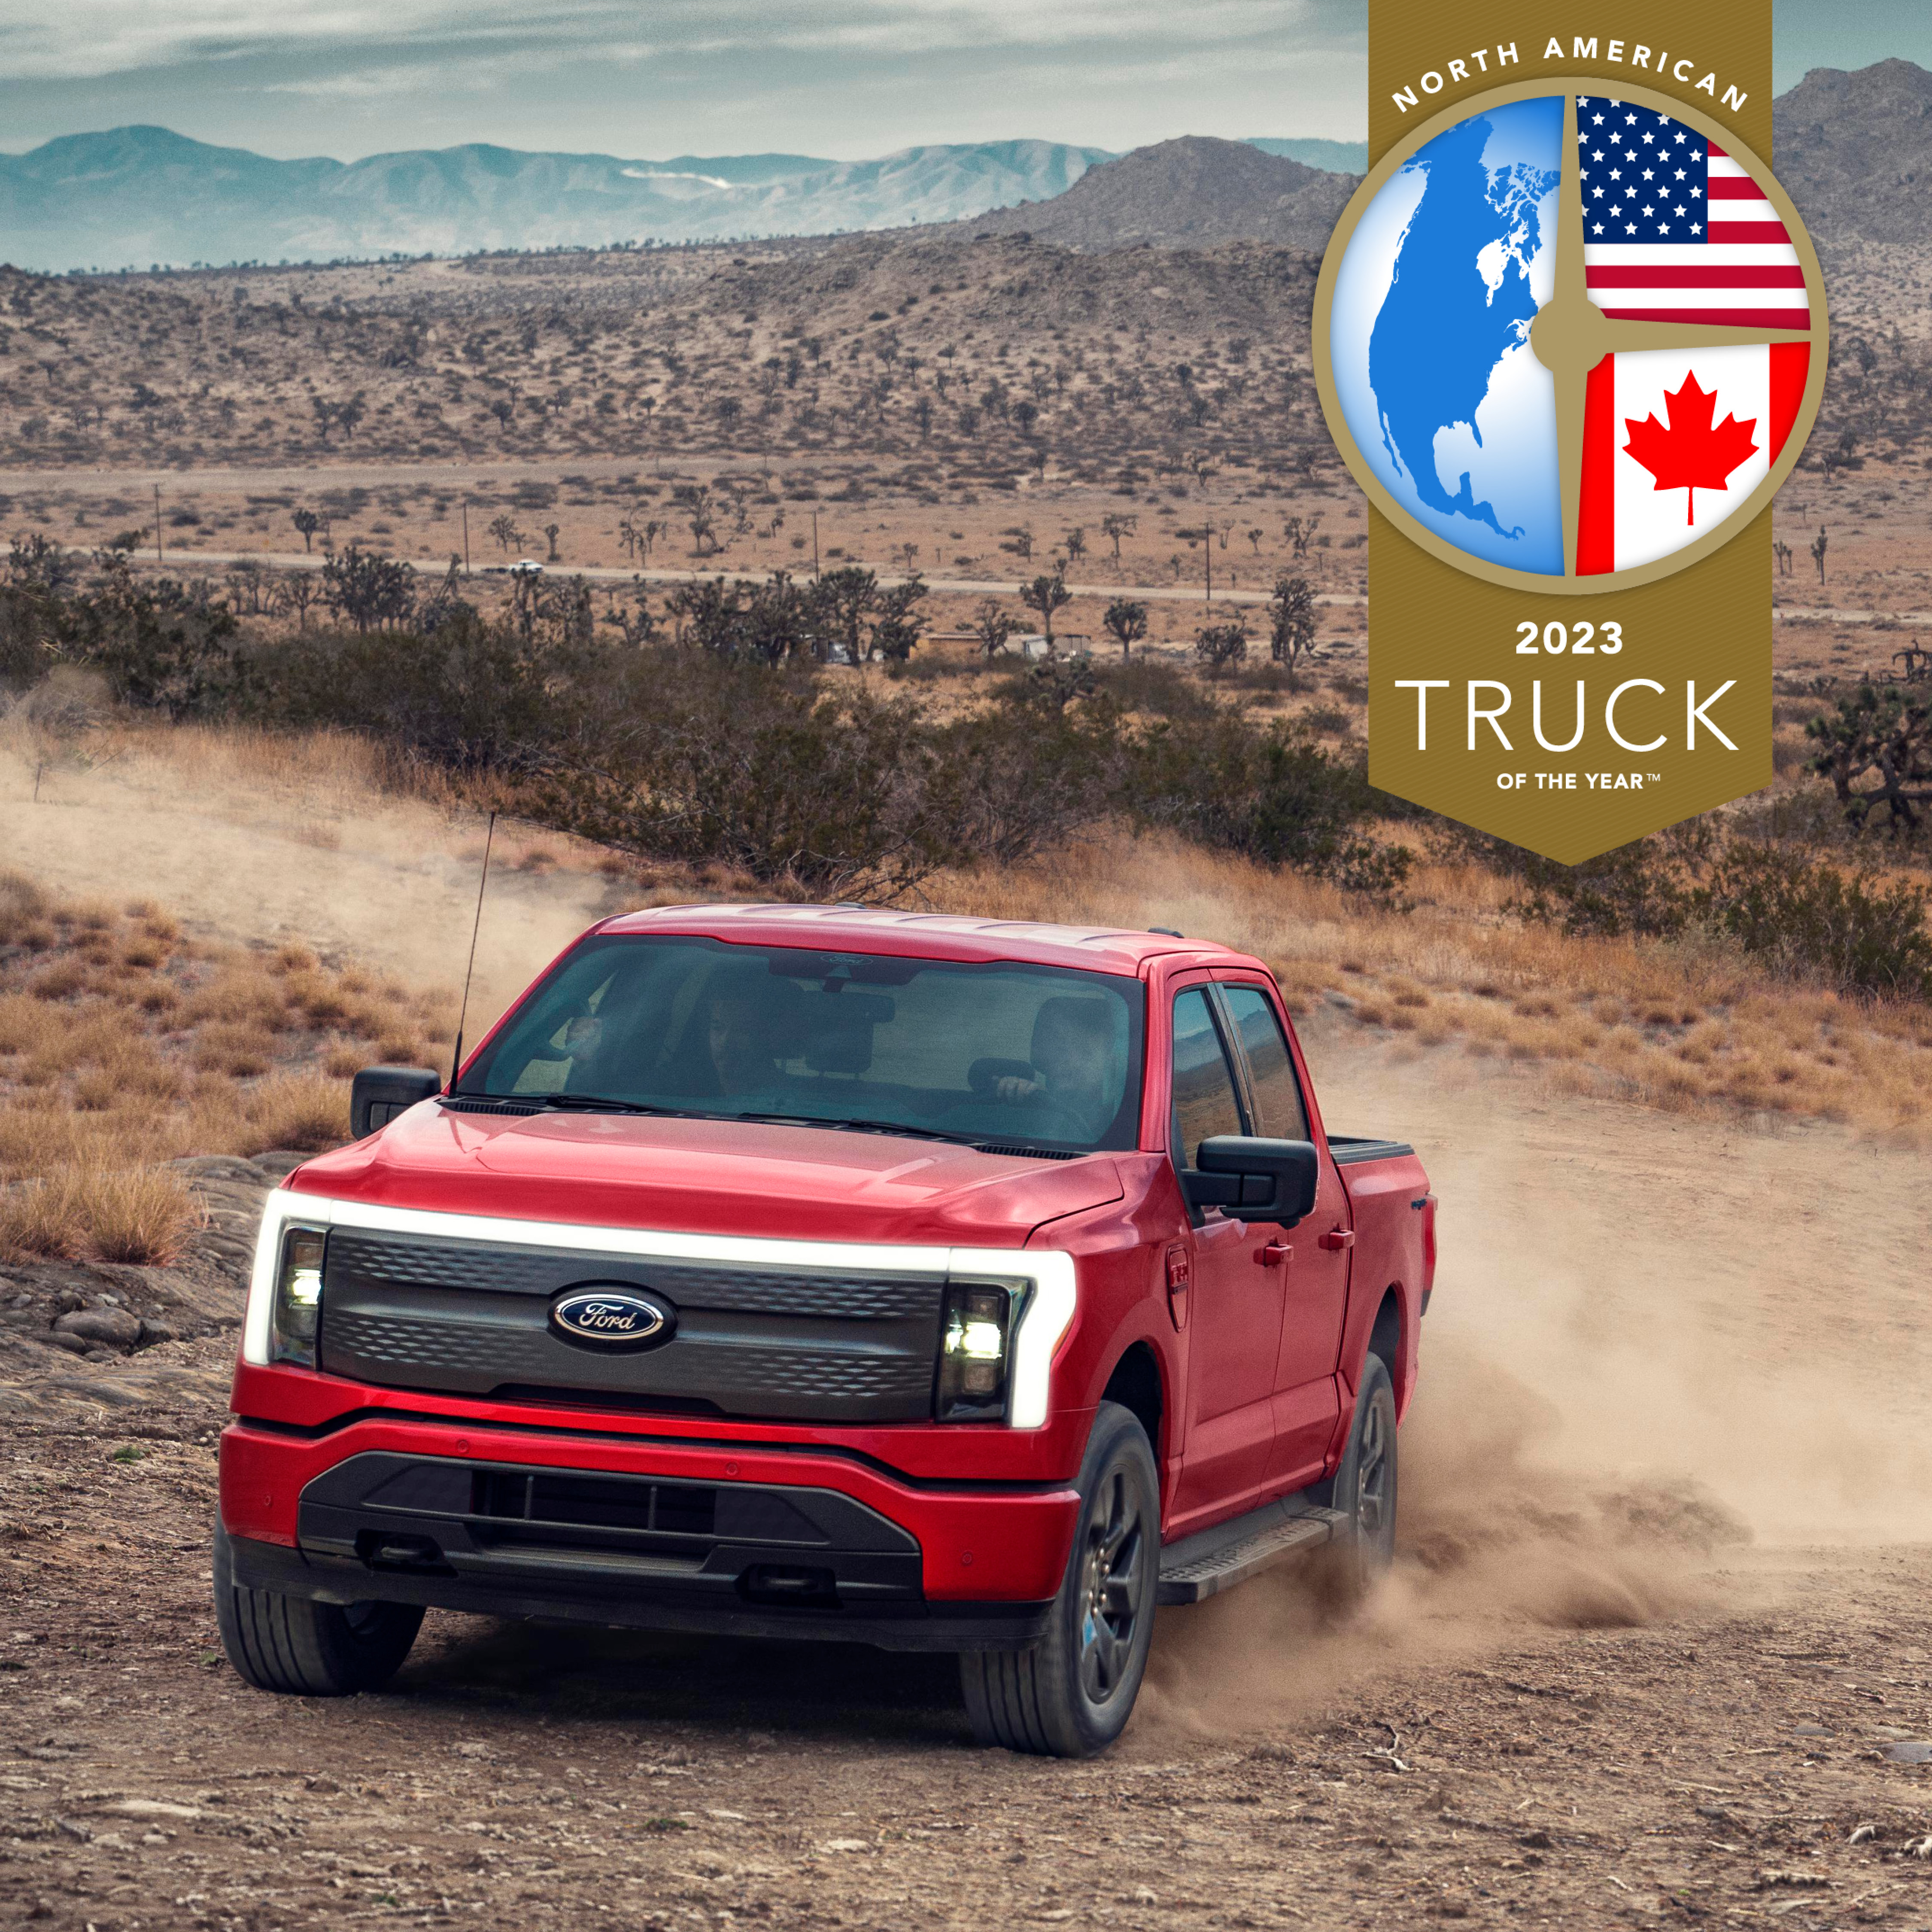 F-150 Lightning Wins 2023 North American Truck of the Year; Third